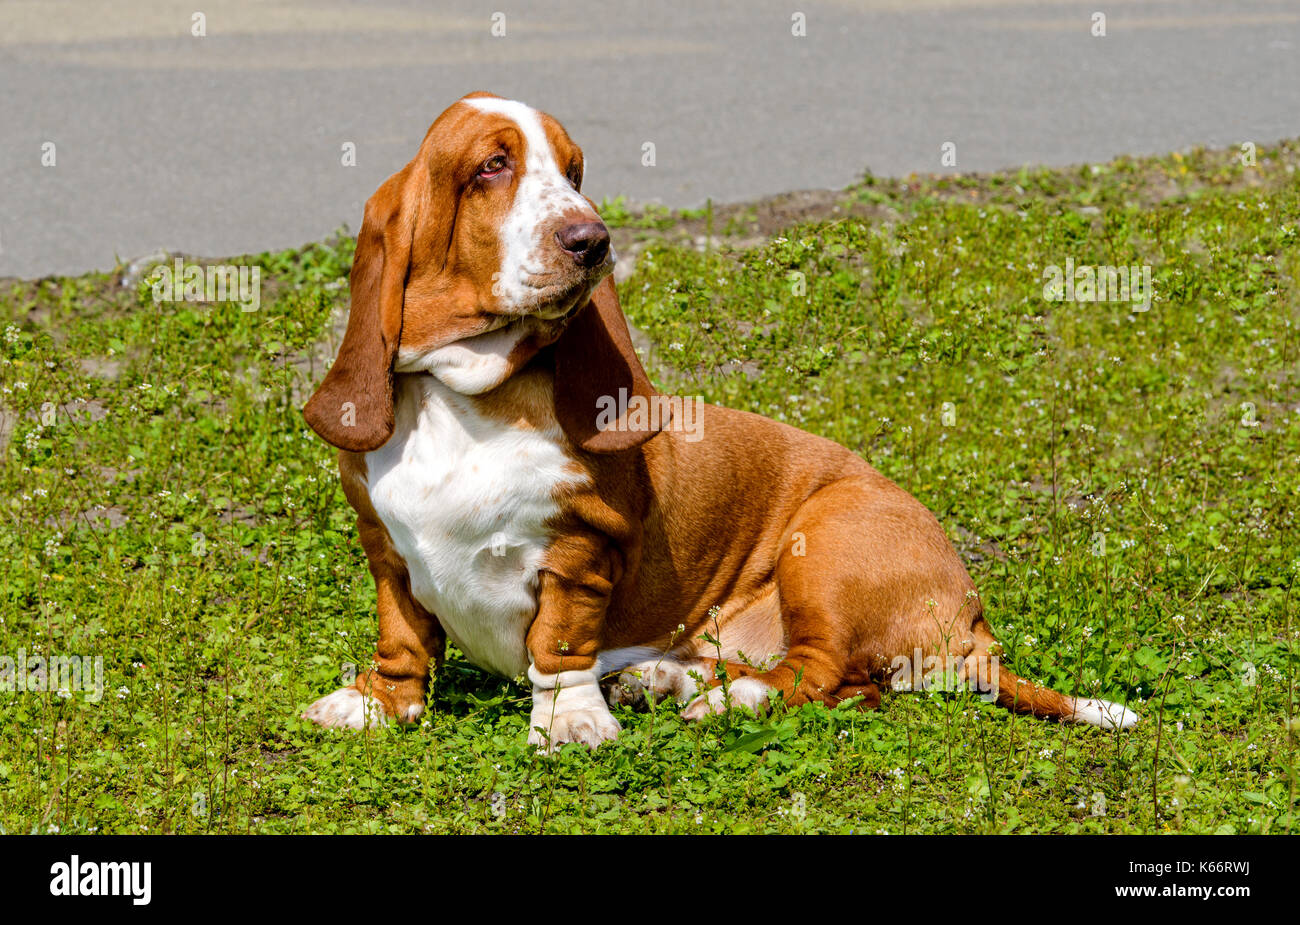 Basset Hound waits.  The Basset Hound is on the grass in the park. Stock Photo